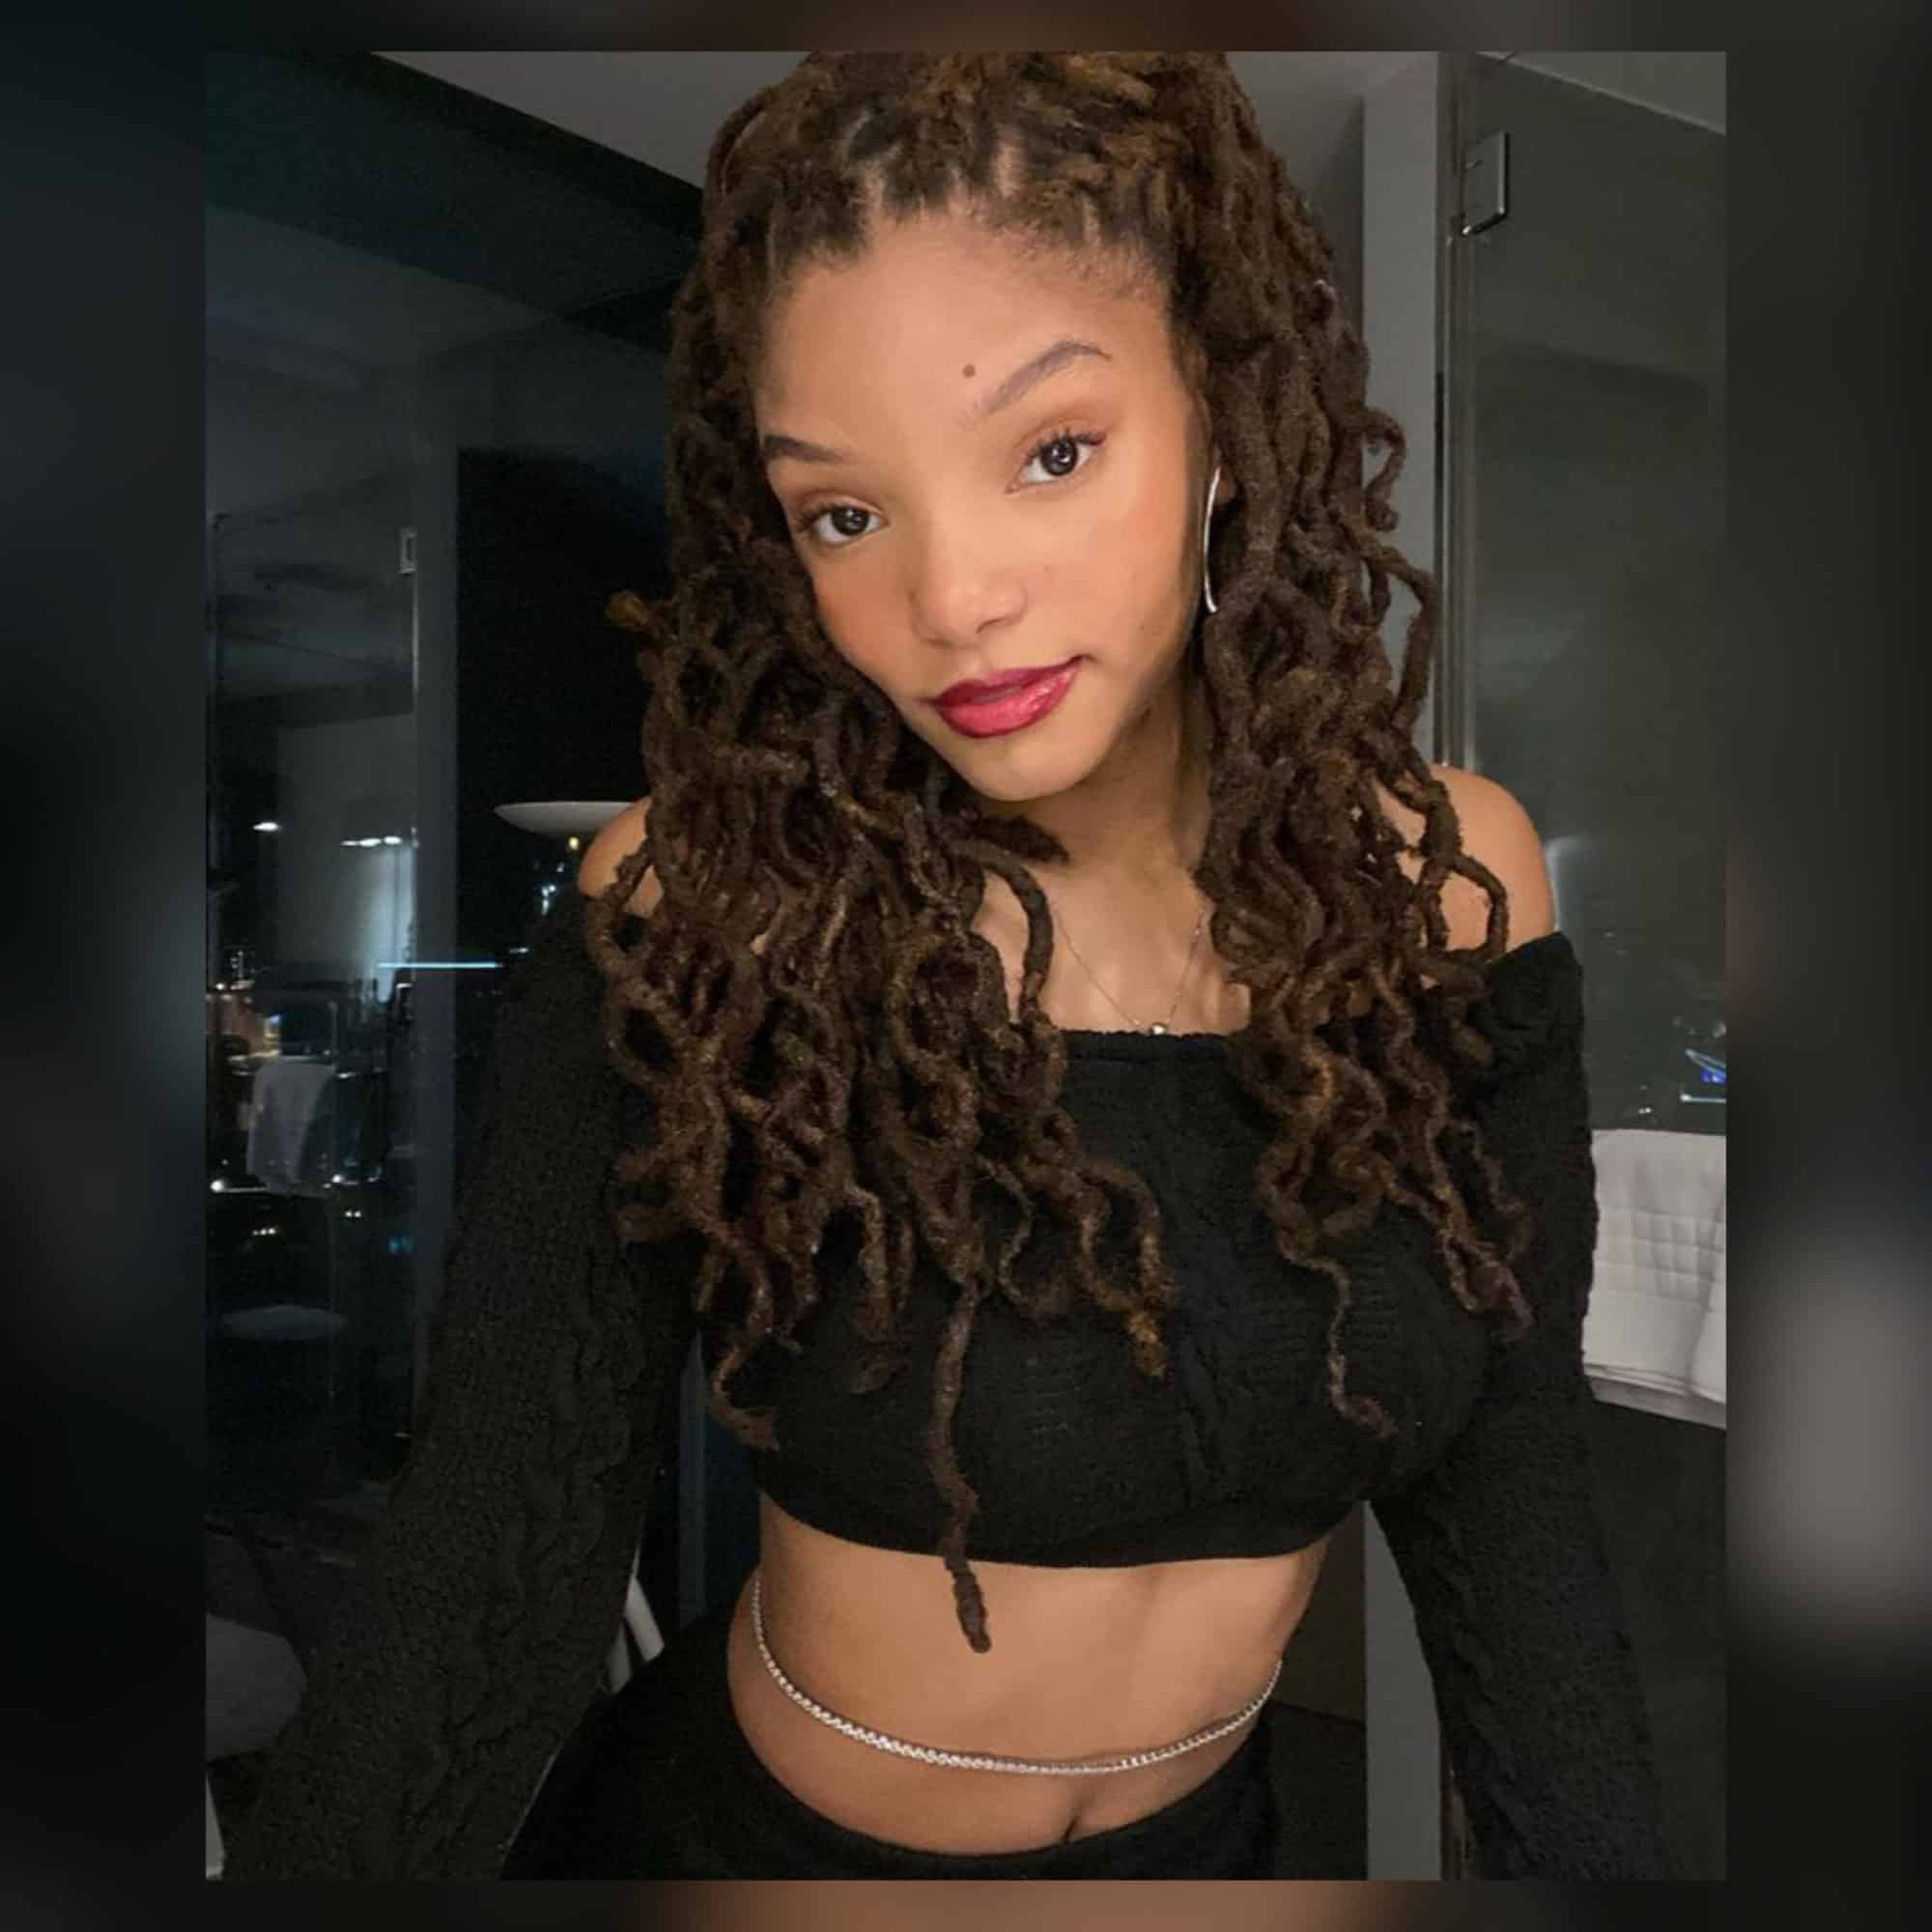 Halle Bailey Tweets Support For Sister Chloe Bailey Following Mathew Knowles’ Recent Comments—“I Ride For My Sister Till The End”